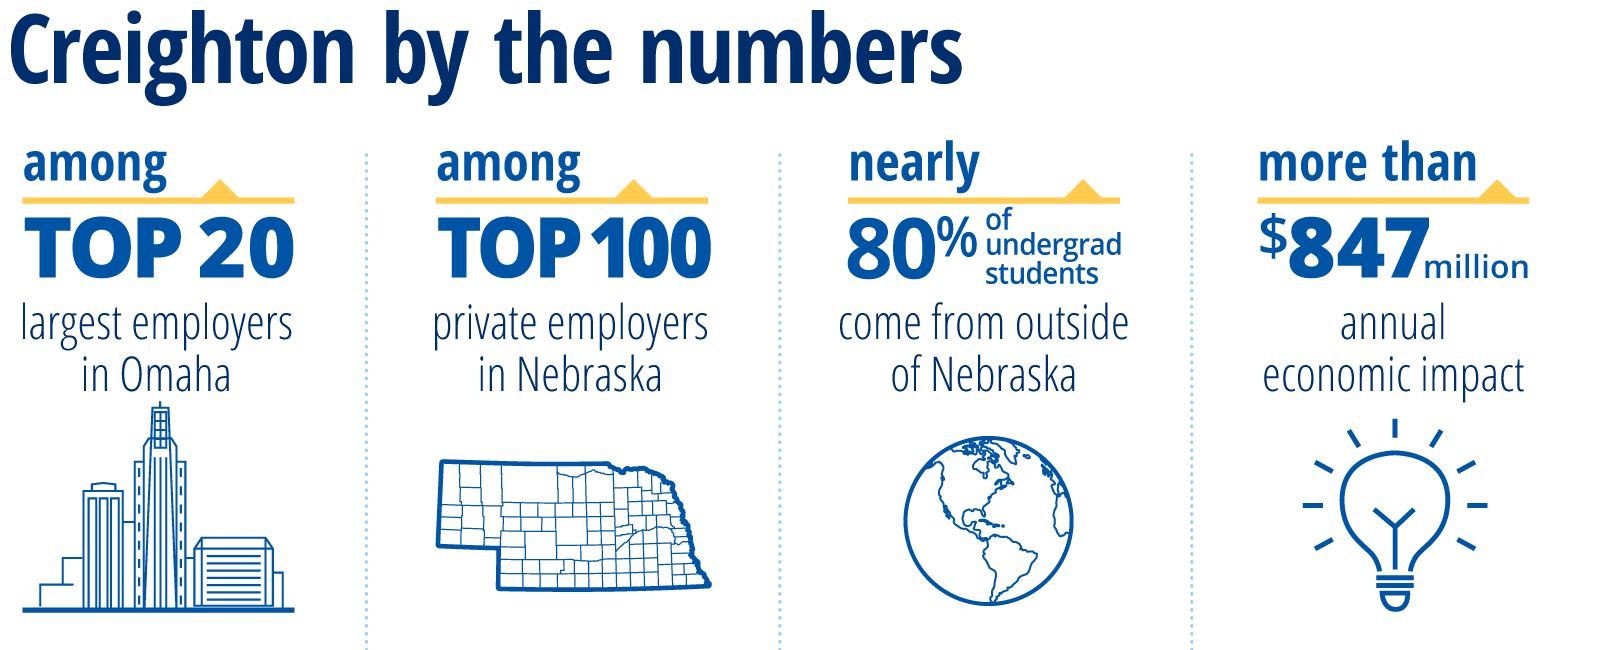 Creighton by the numbers chart showing economic impact of the university